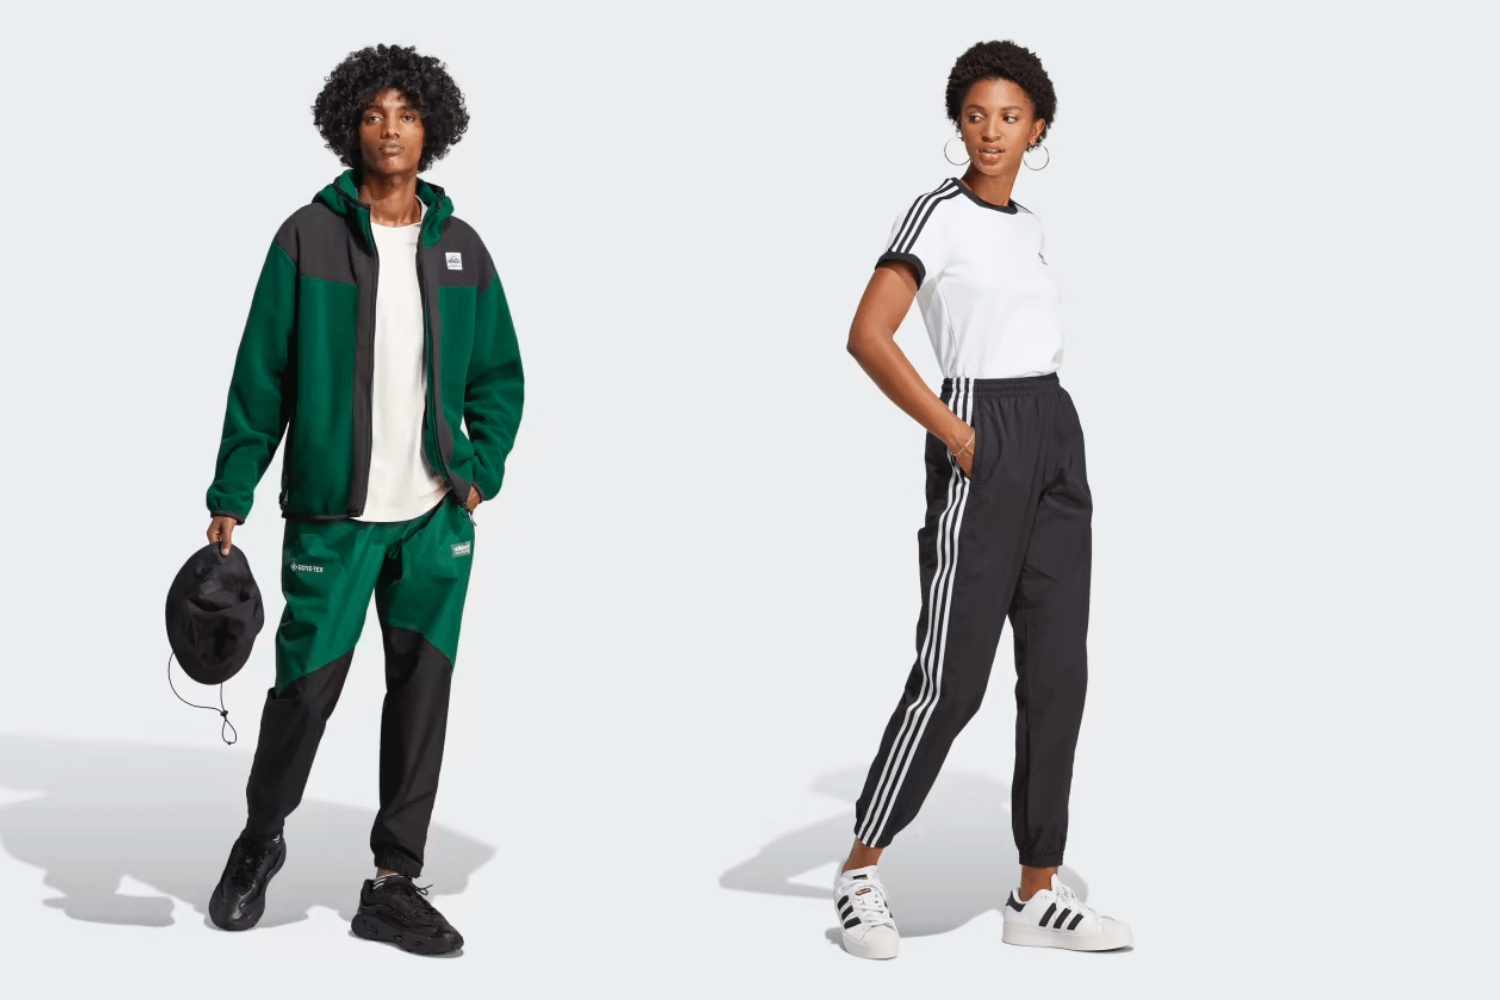 The adidas End of Season sale offers you up to 50% discount